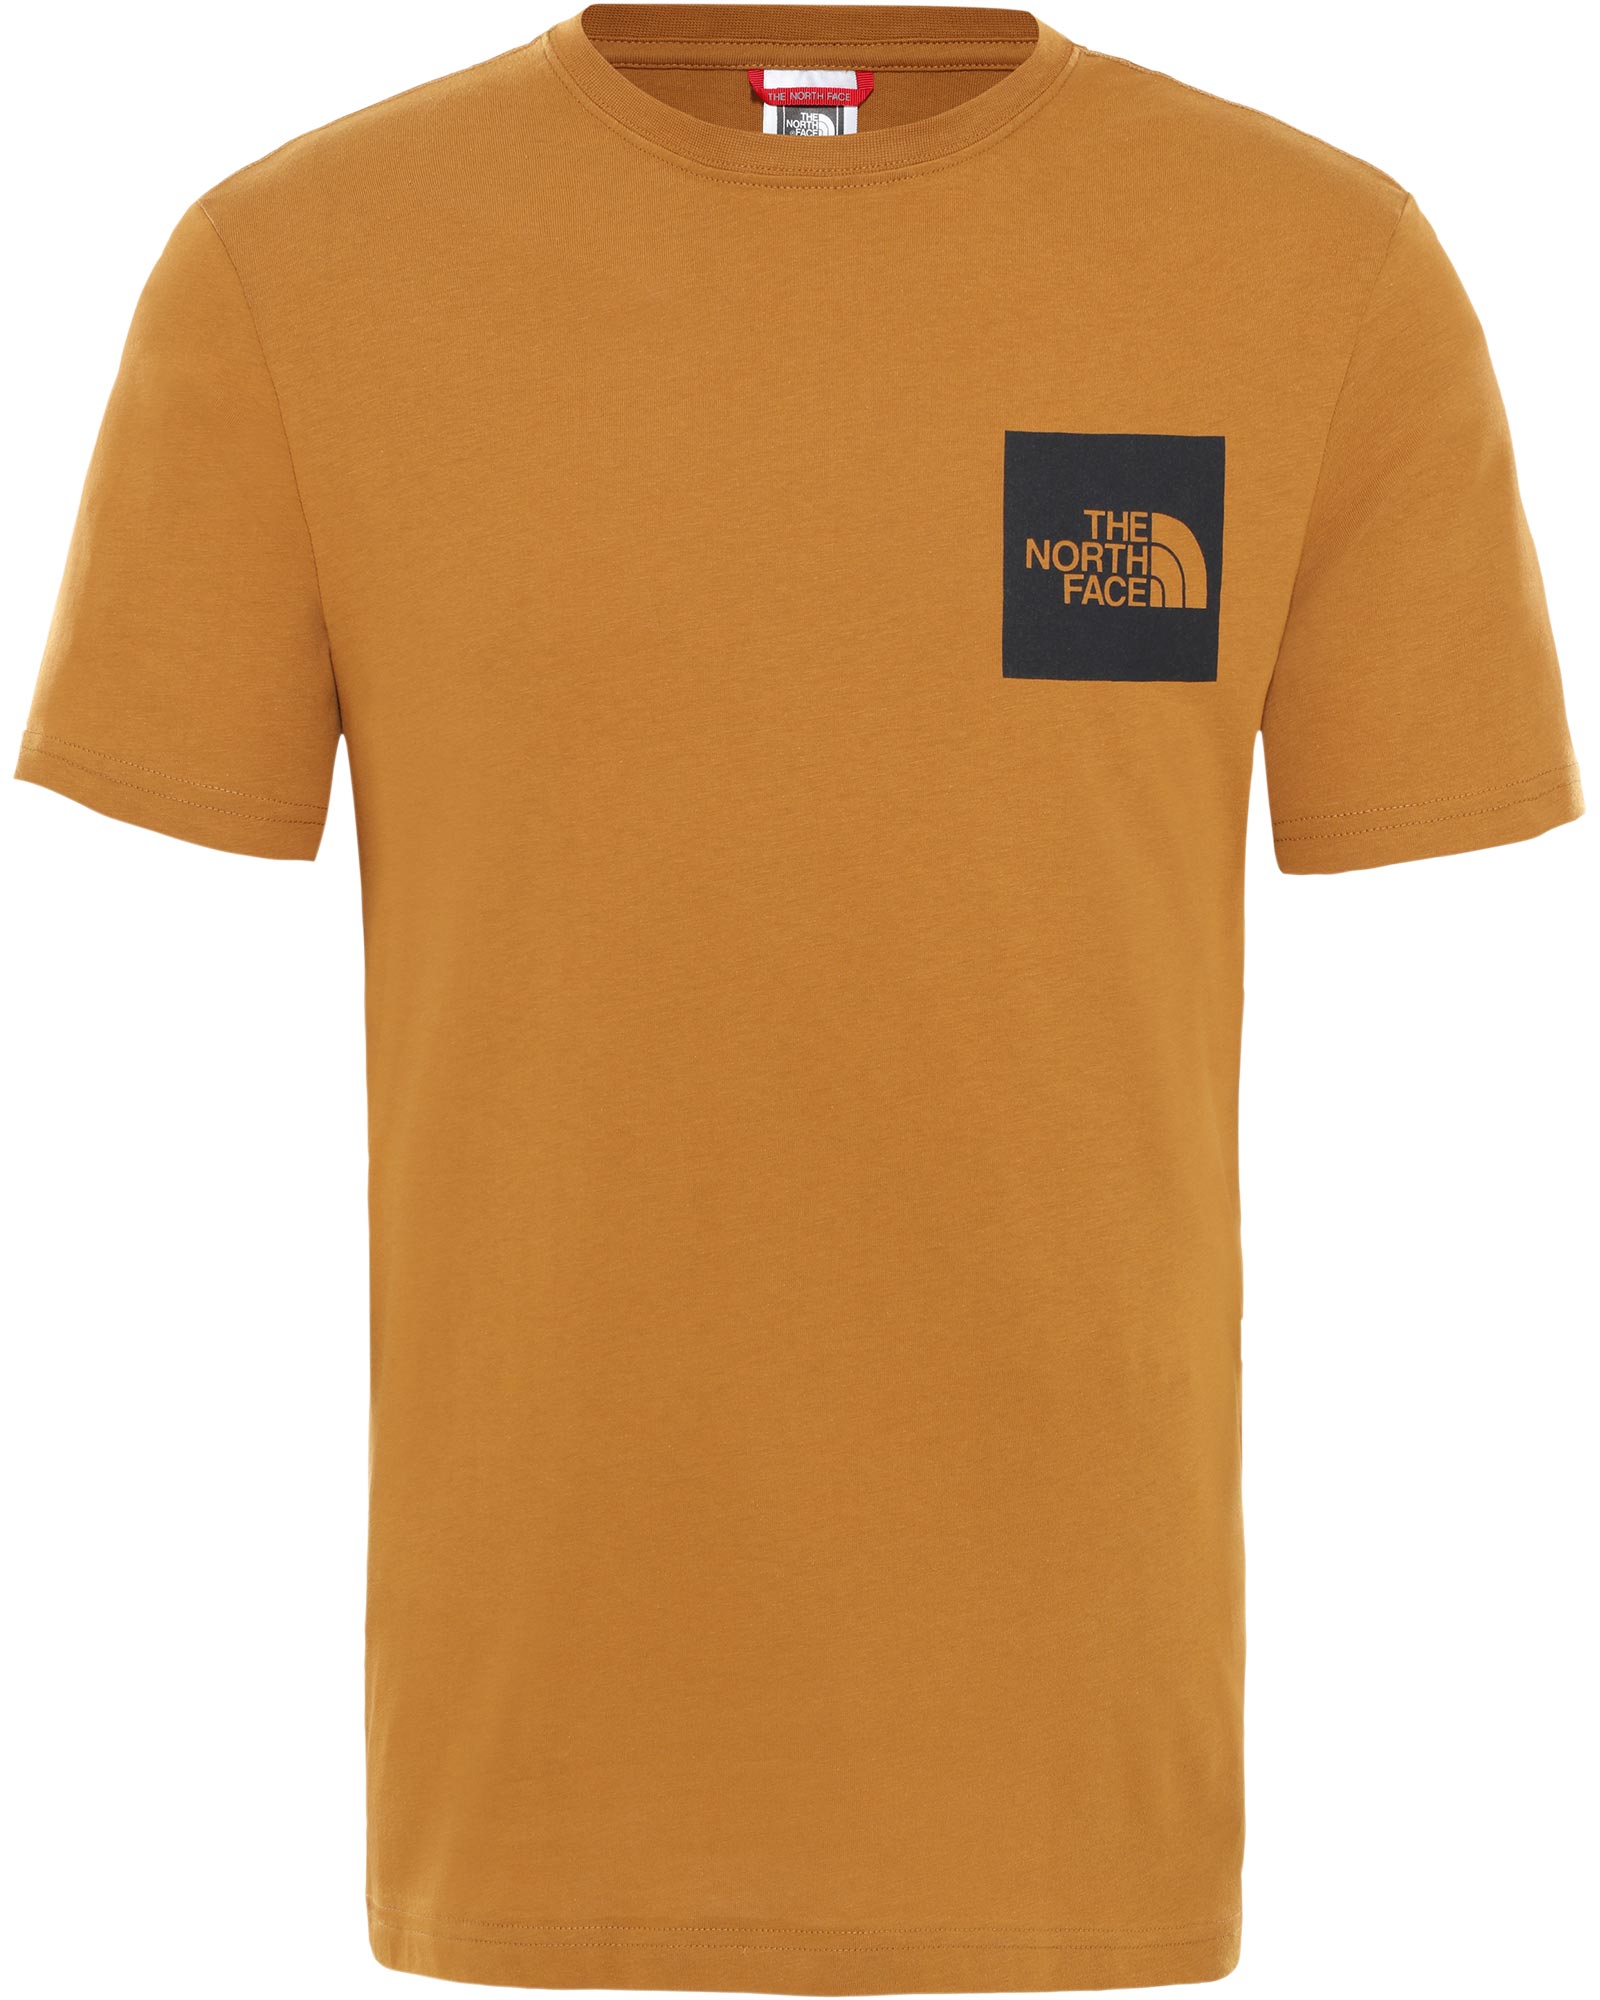 The North Face Fine Men’s Tee - Timber Tan S